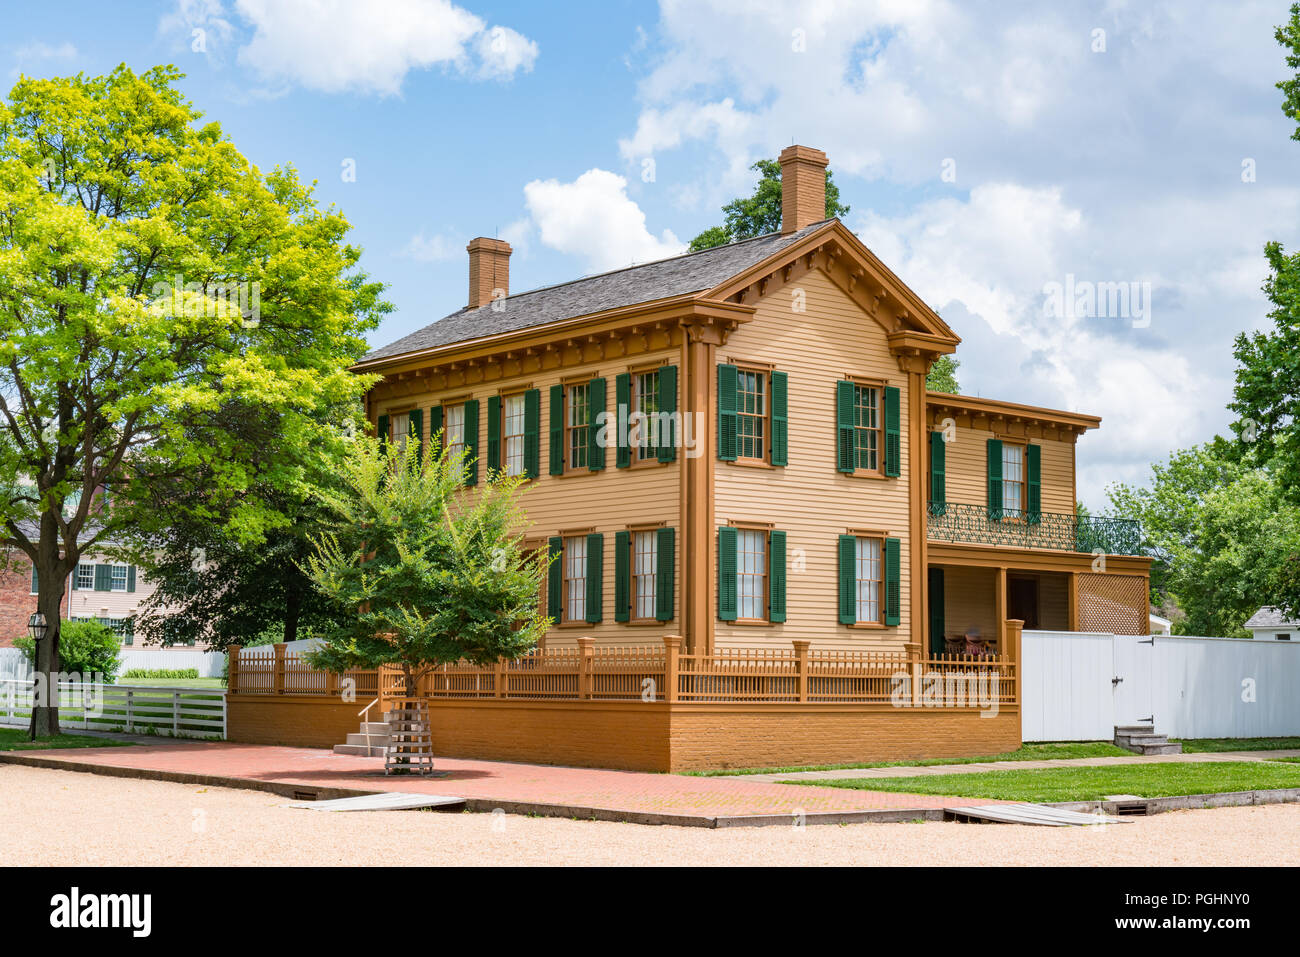 Home of President Abraham Lincoln is a National Historic Site located in Springfield, Illinois Stock Photo